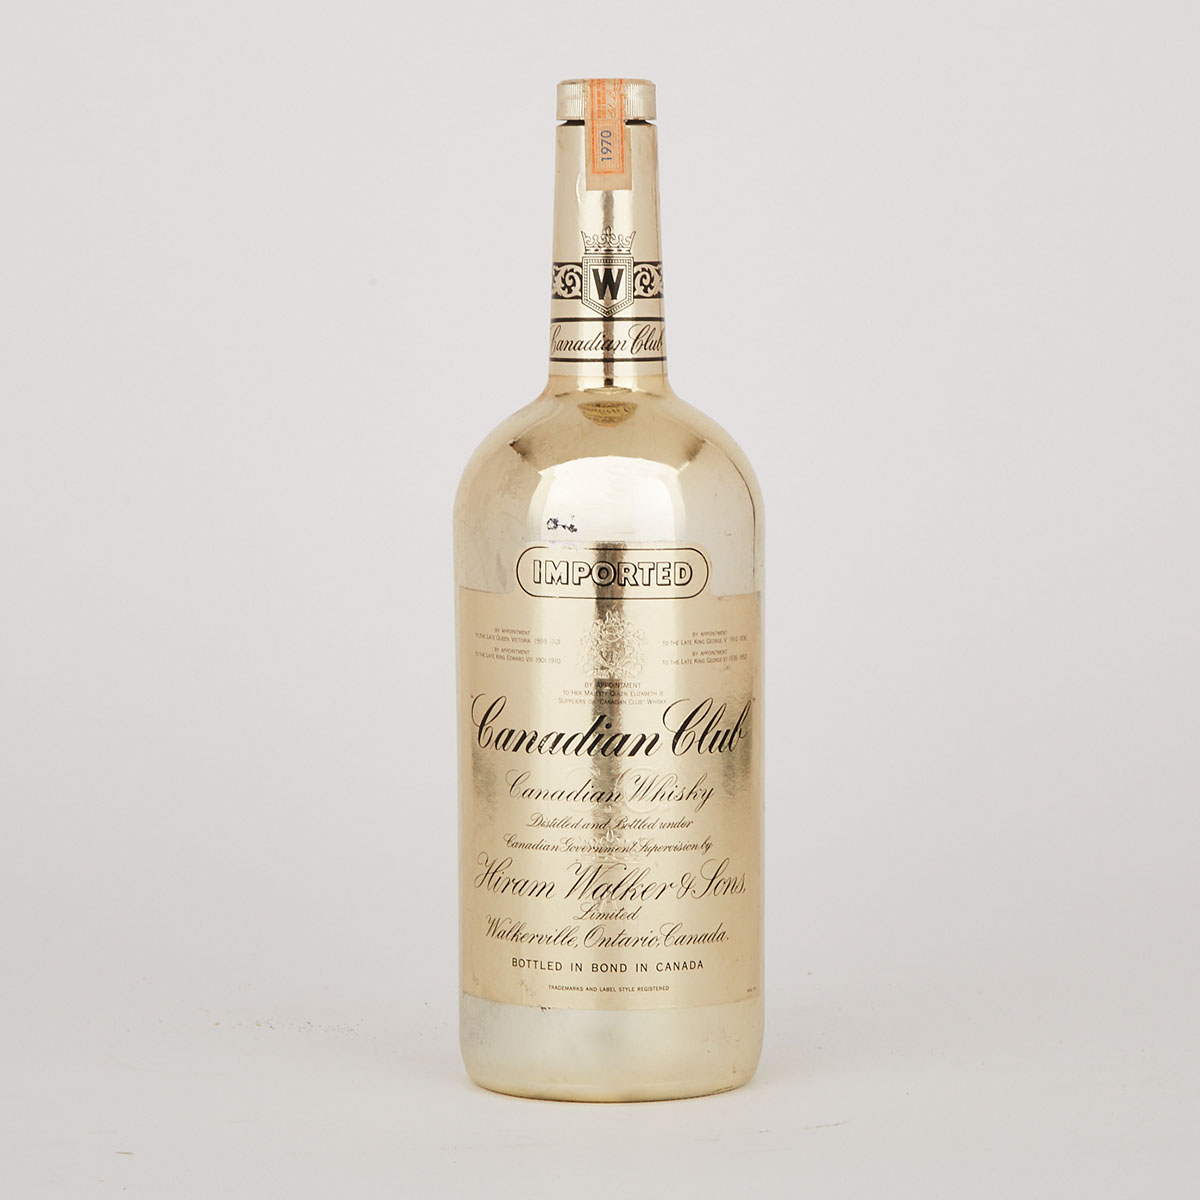 CANADIAN CLUB CANADIAN WHISKY  (1)